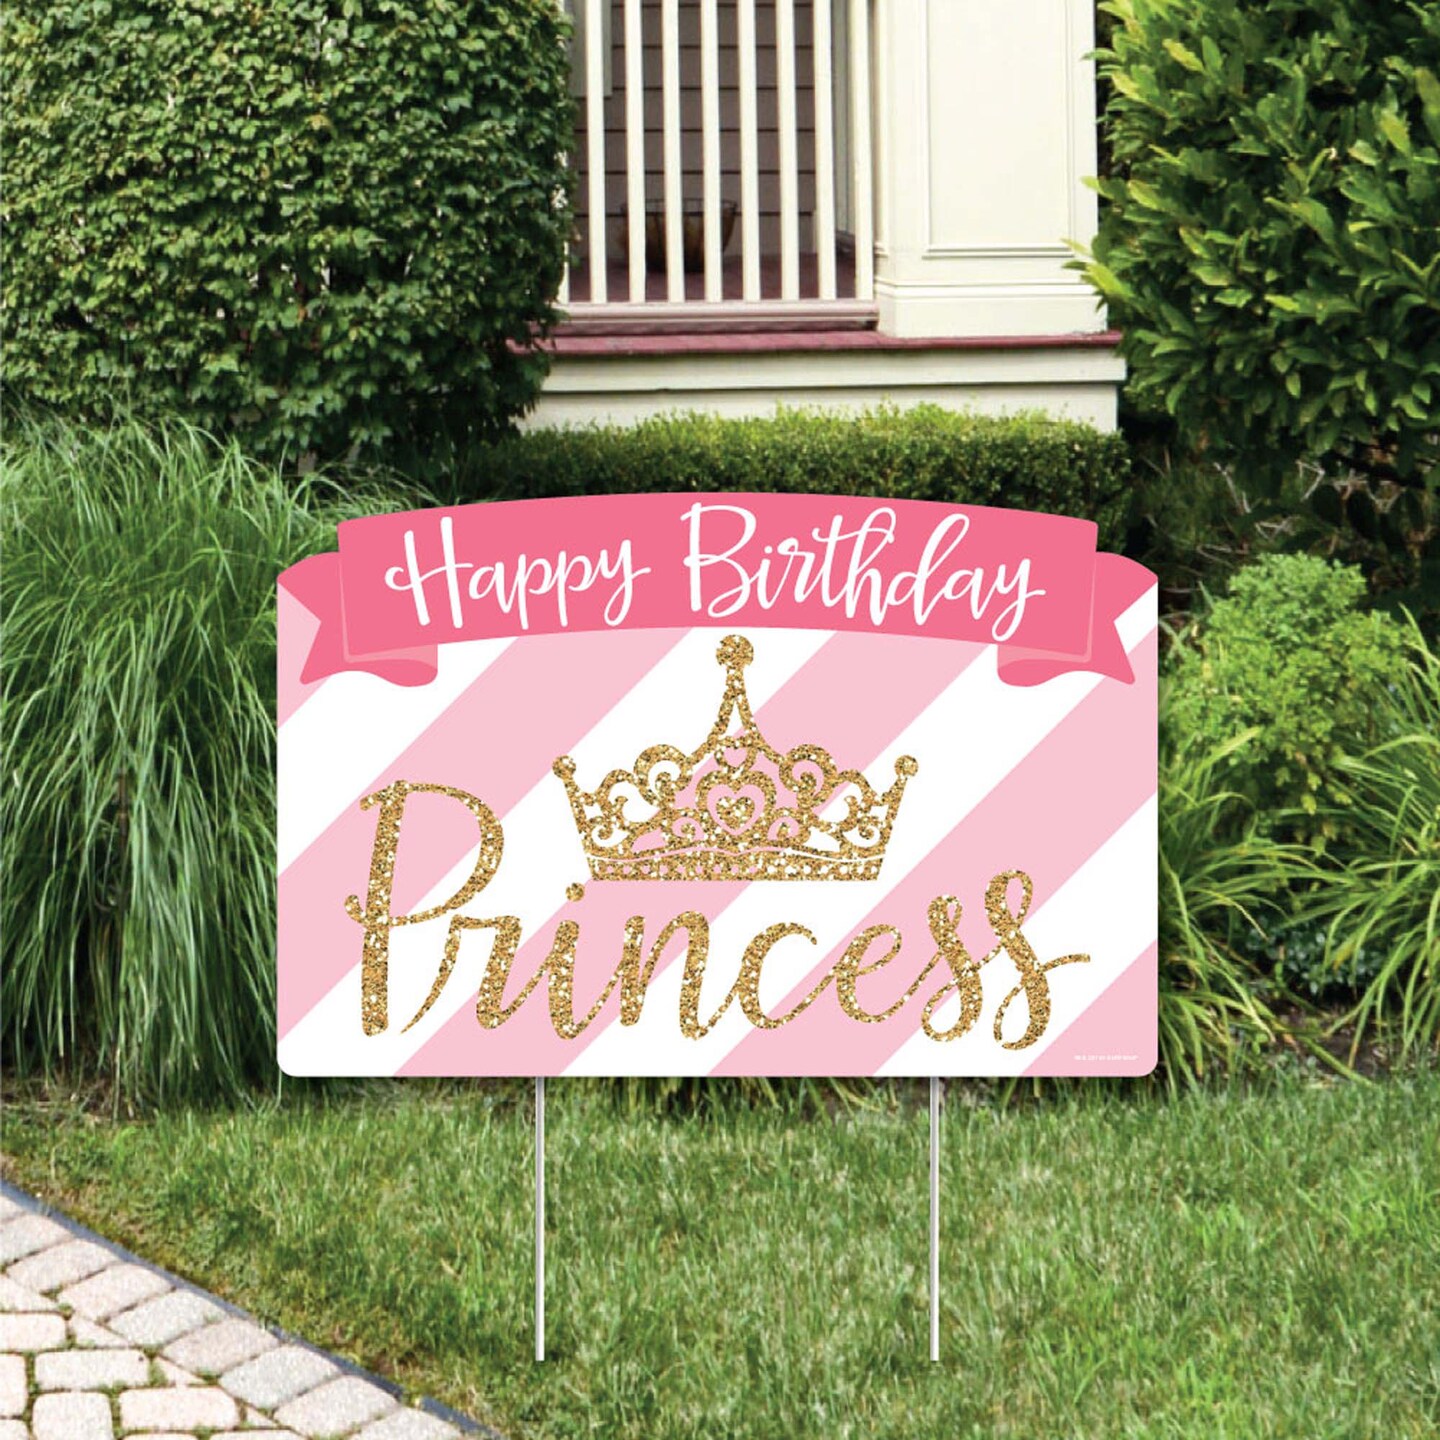 Big Dot of Happiness Little Princess Crown - Pink and Gold Princess Birthday Party Yard Sign Lawn Decorations - Happy Birthday Party Yardy Sign